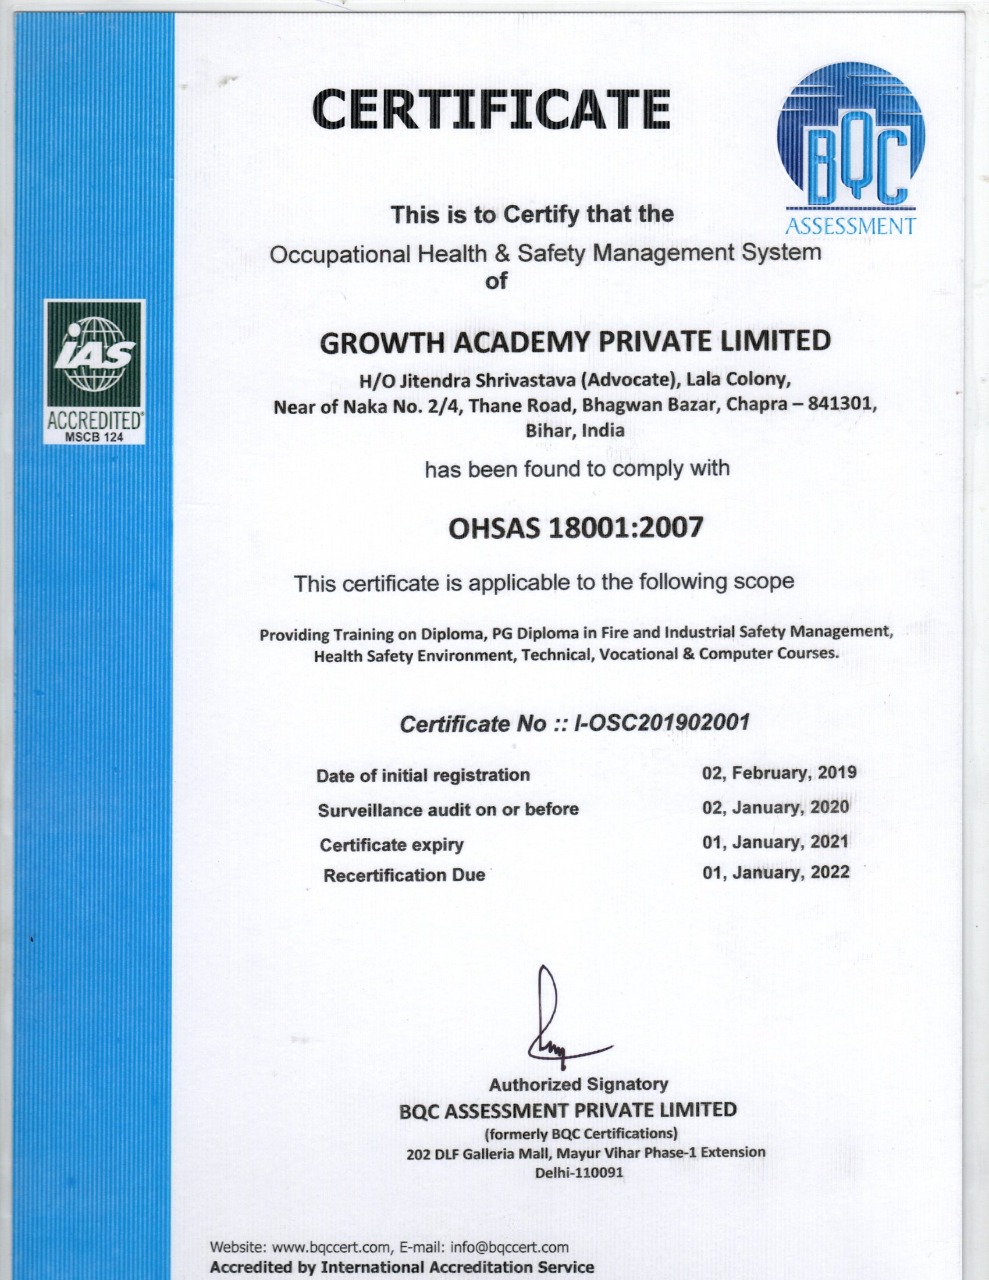 Registration Certificate of Growth Academy